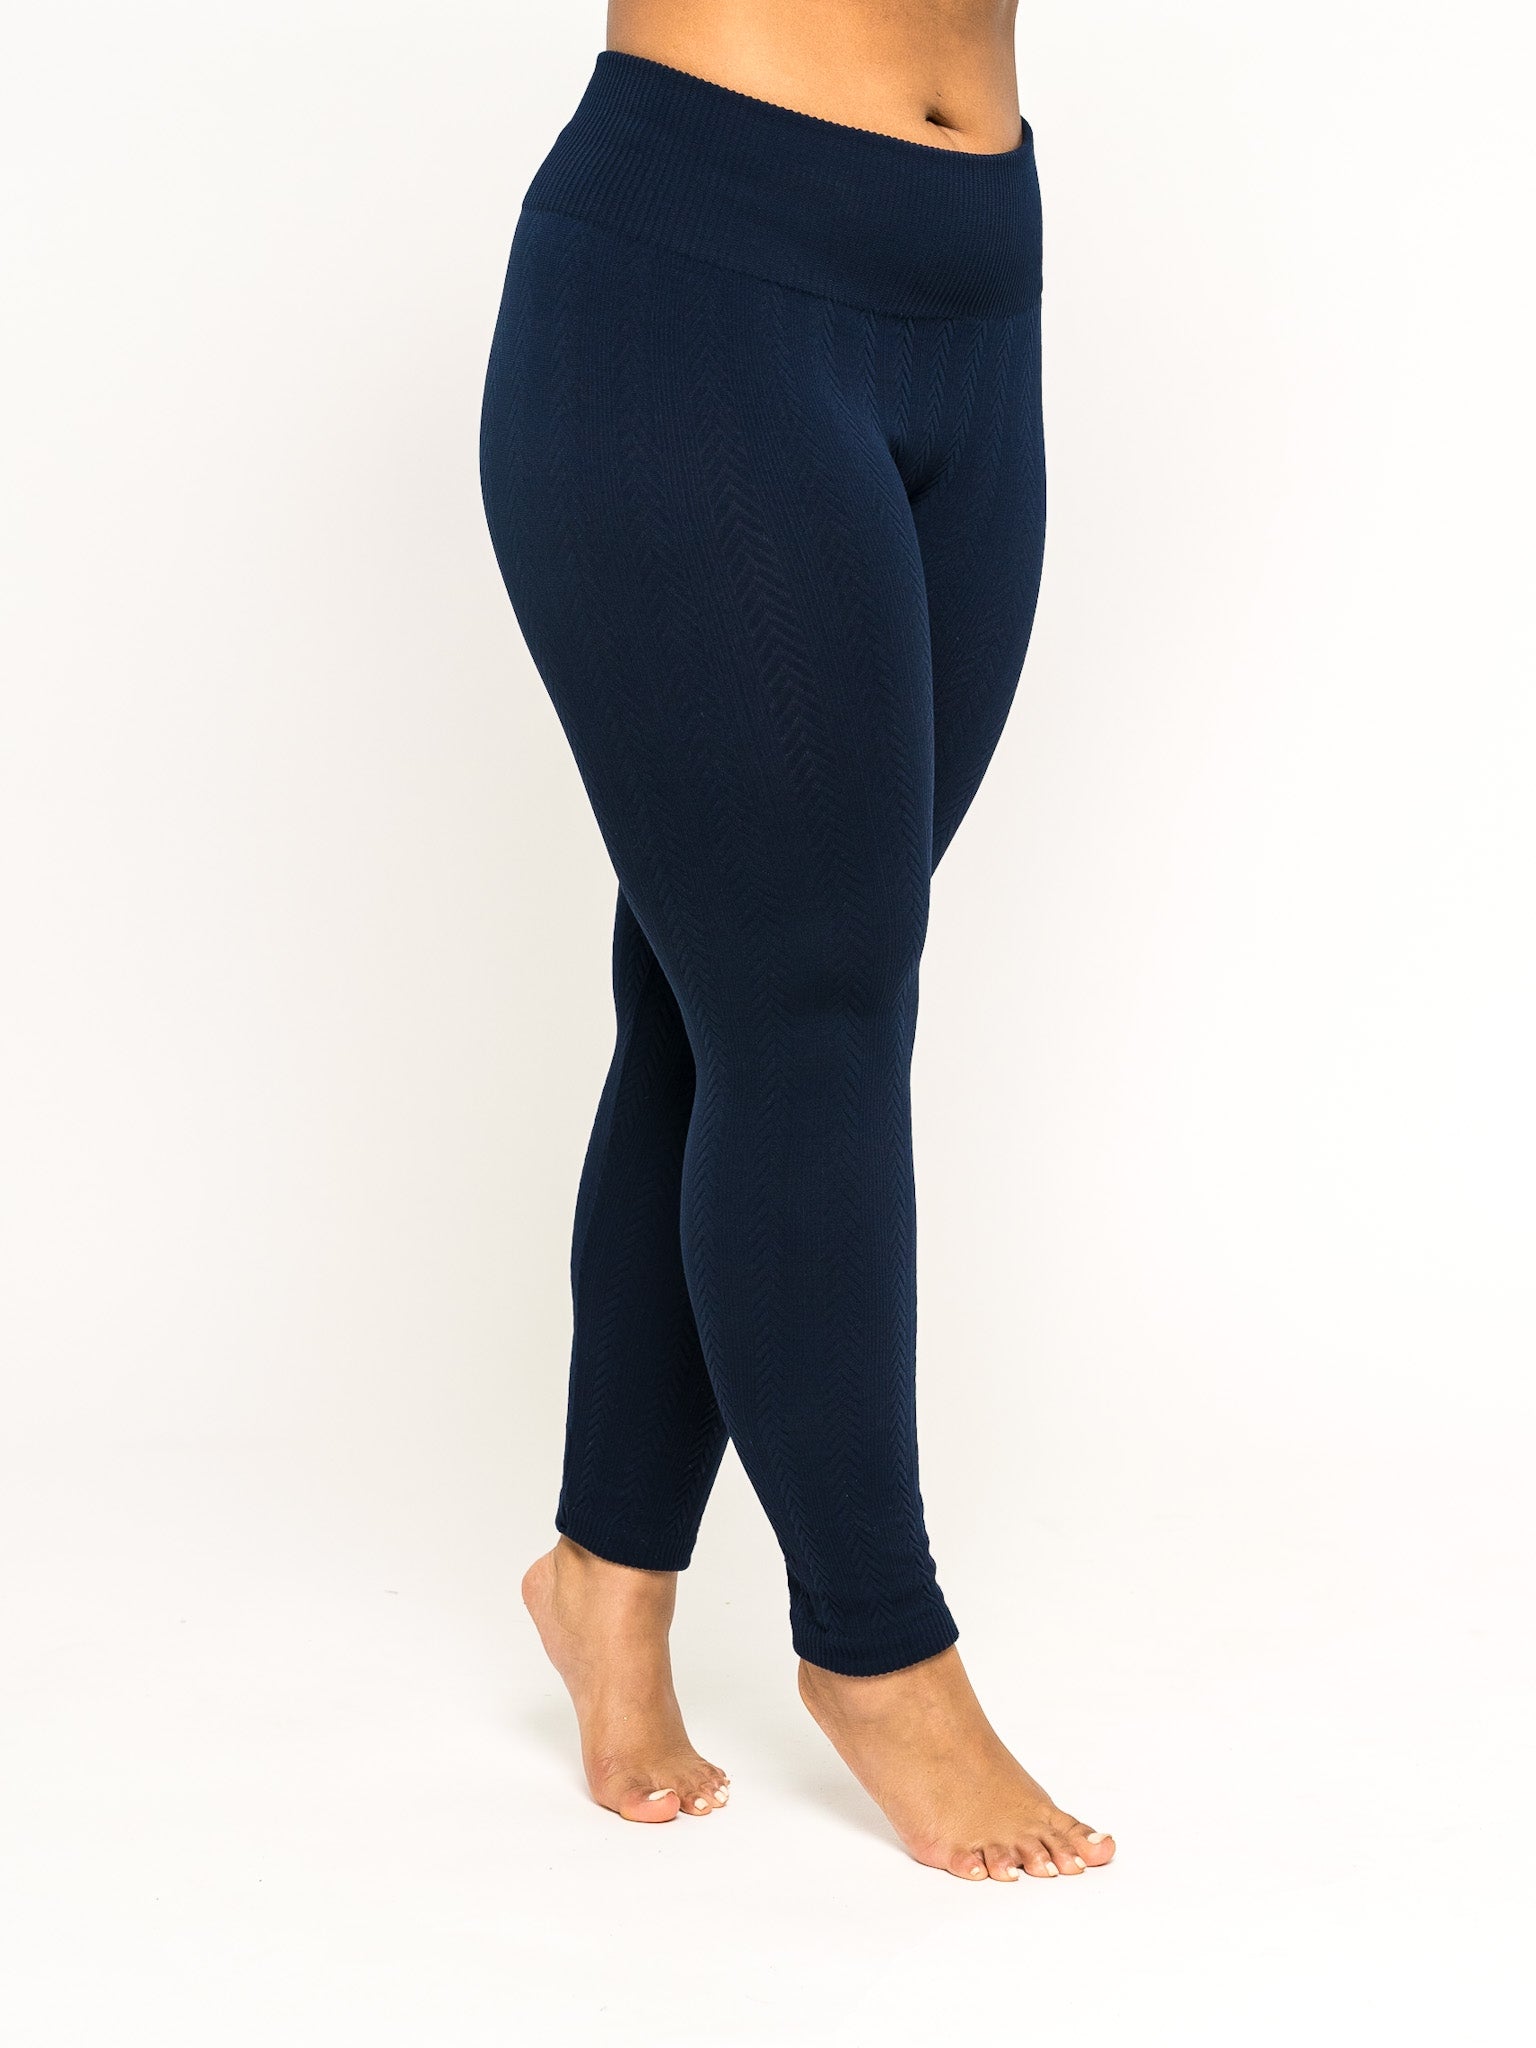 Solid Color Seamless Fleece Lined Legging, Charcoal